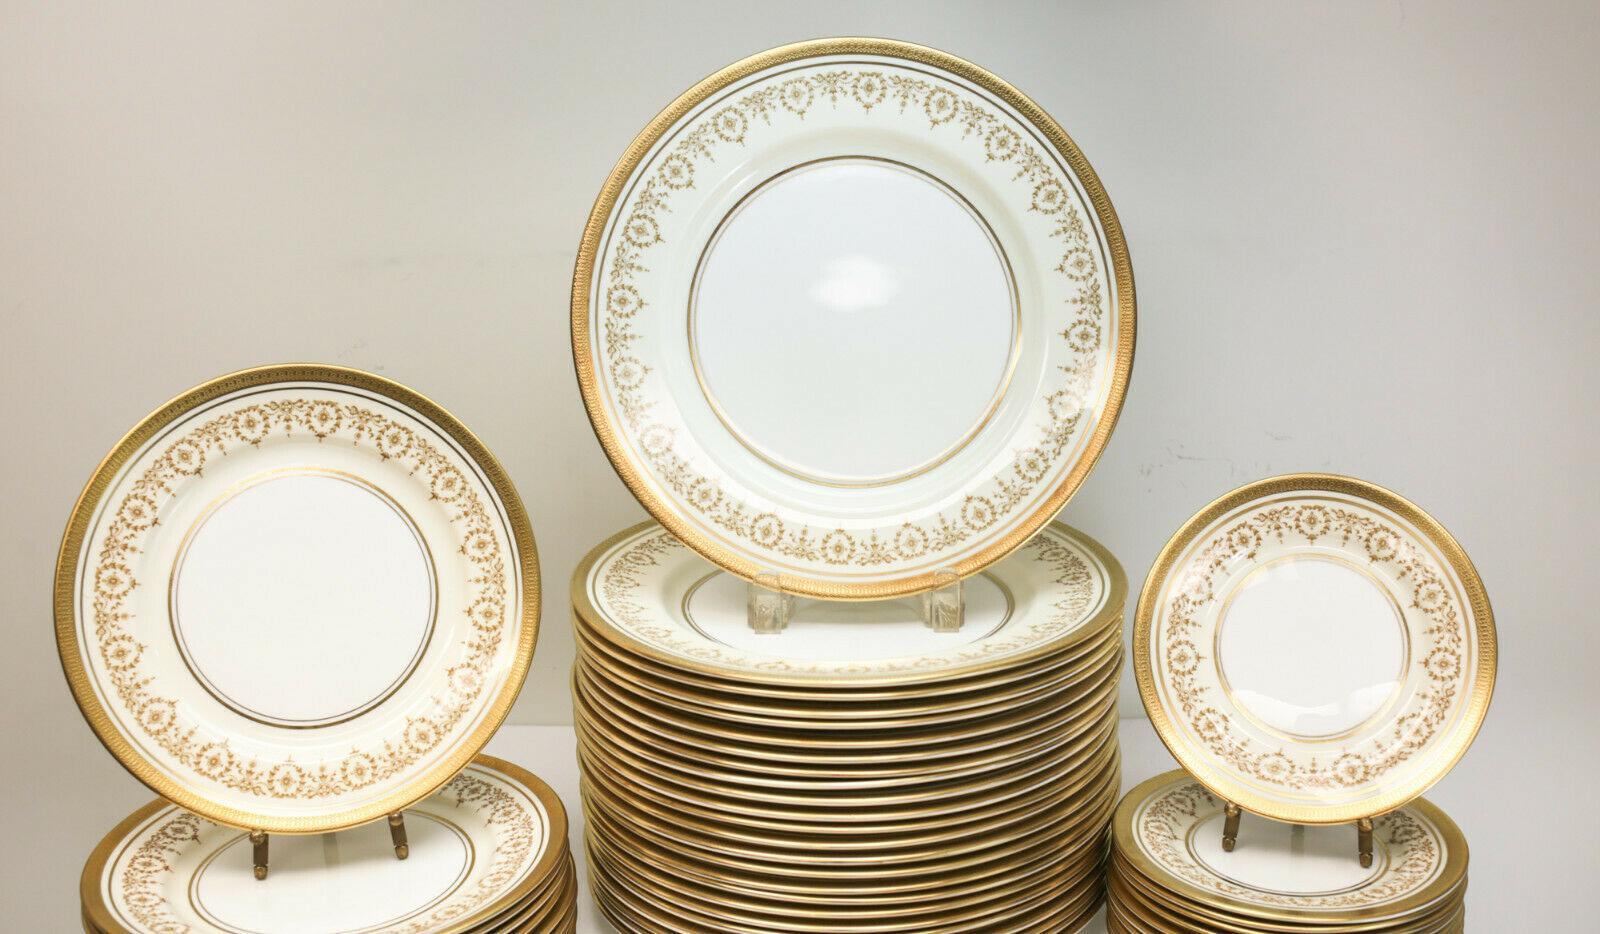 Aynsley bone china porcelain dinner service for 12 in gold Dowery, circa 1960. Gilt trim to the edges with gilt ribbons to the inner rim. Aynsley mark to the underside. The service comes with 11 salad plates, 12 bread and butter plates, 24 dinner